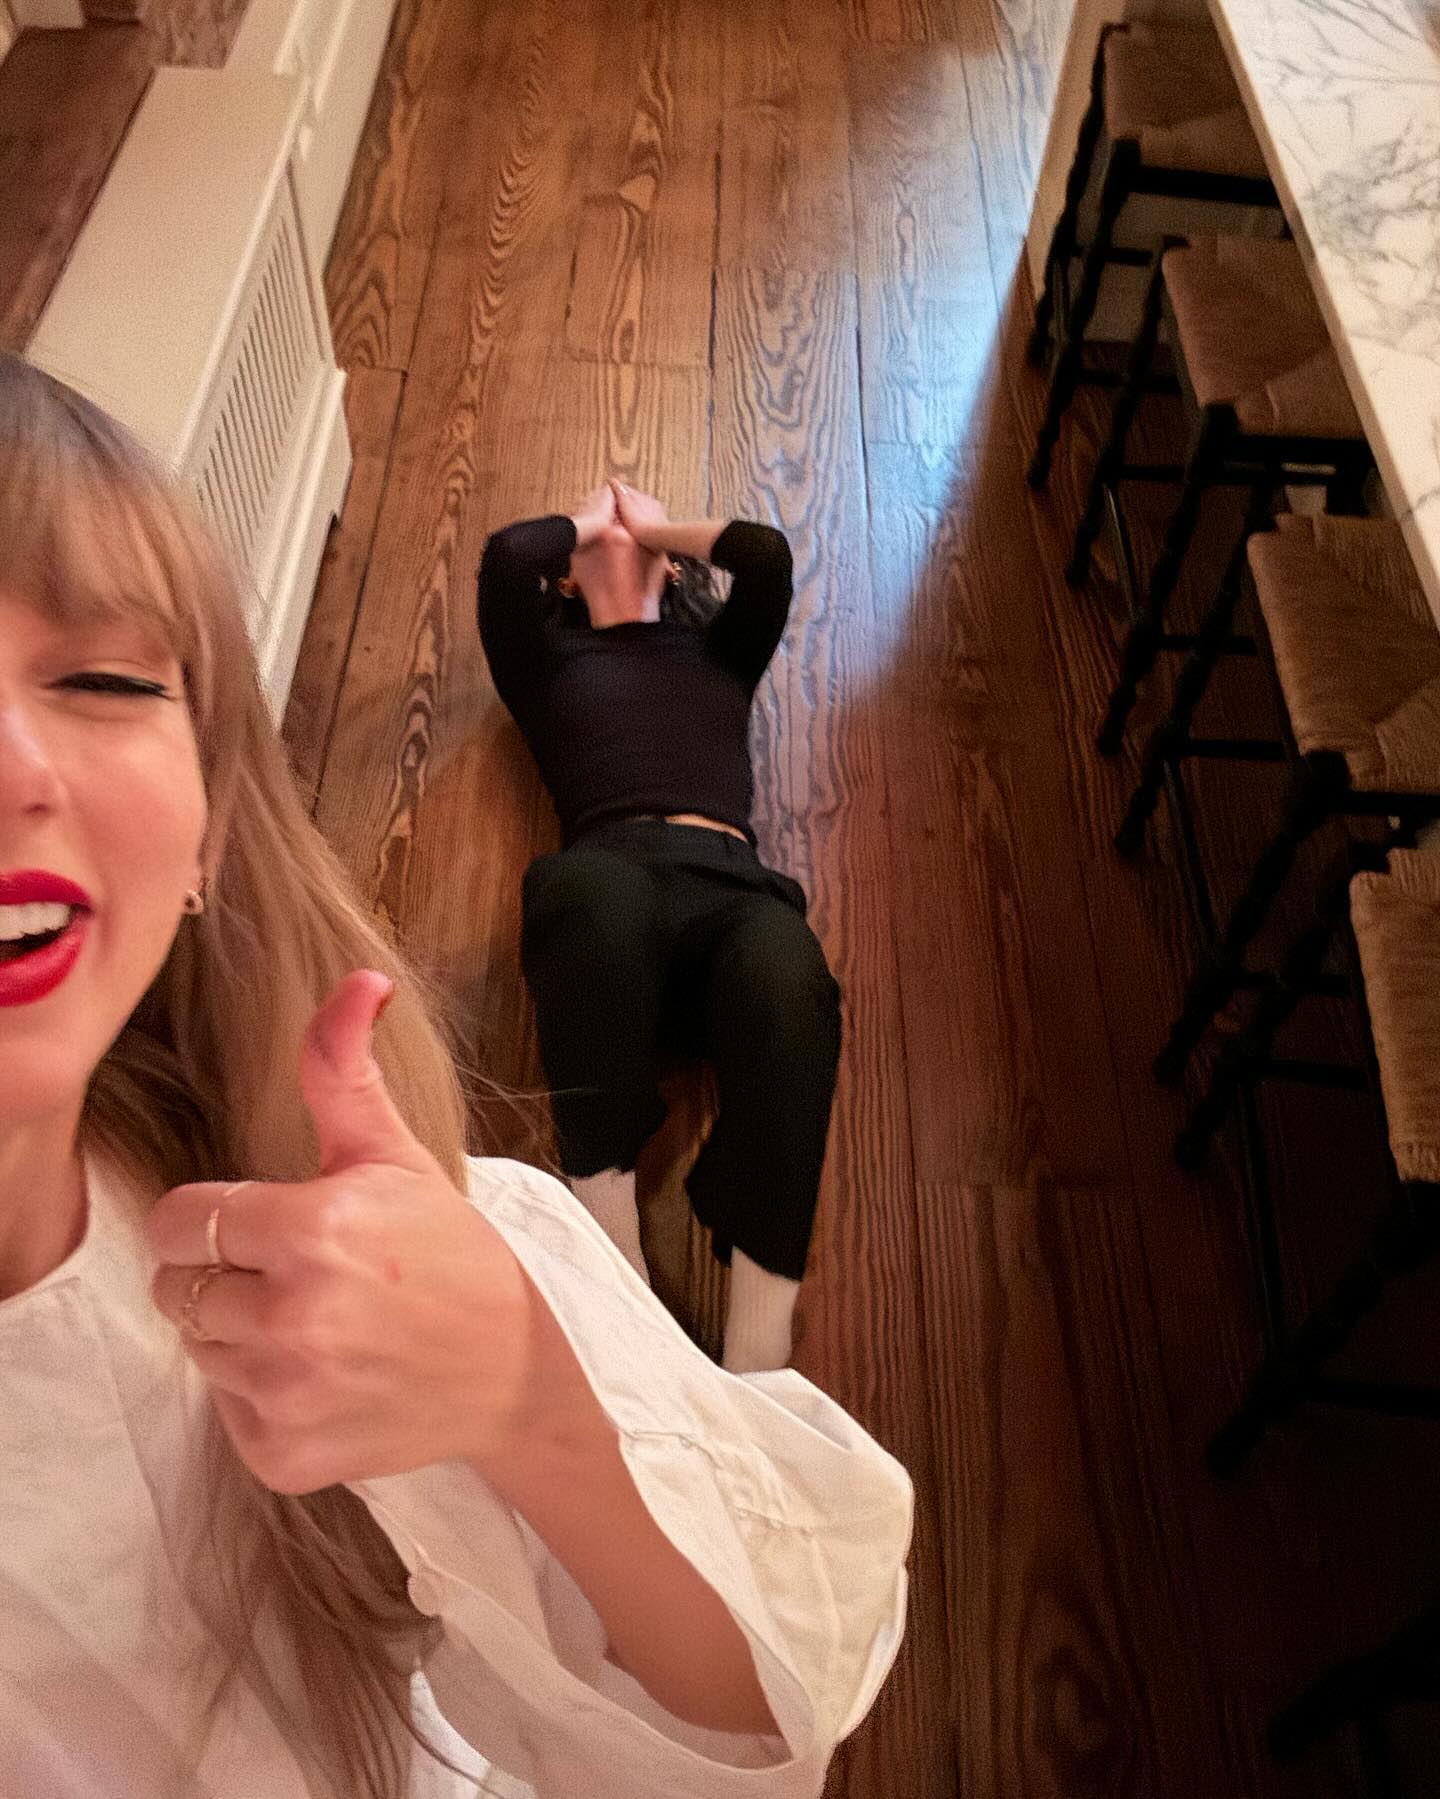 Before the fire happened, Taylor and Gracie had spent the night listening to their unreleased albums and Gracie laid on the floor when she heard Taylor's track, The Smallest Man Who Ever Lived